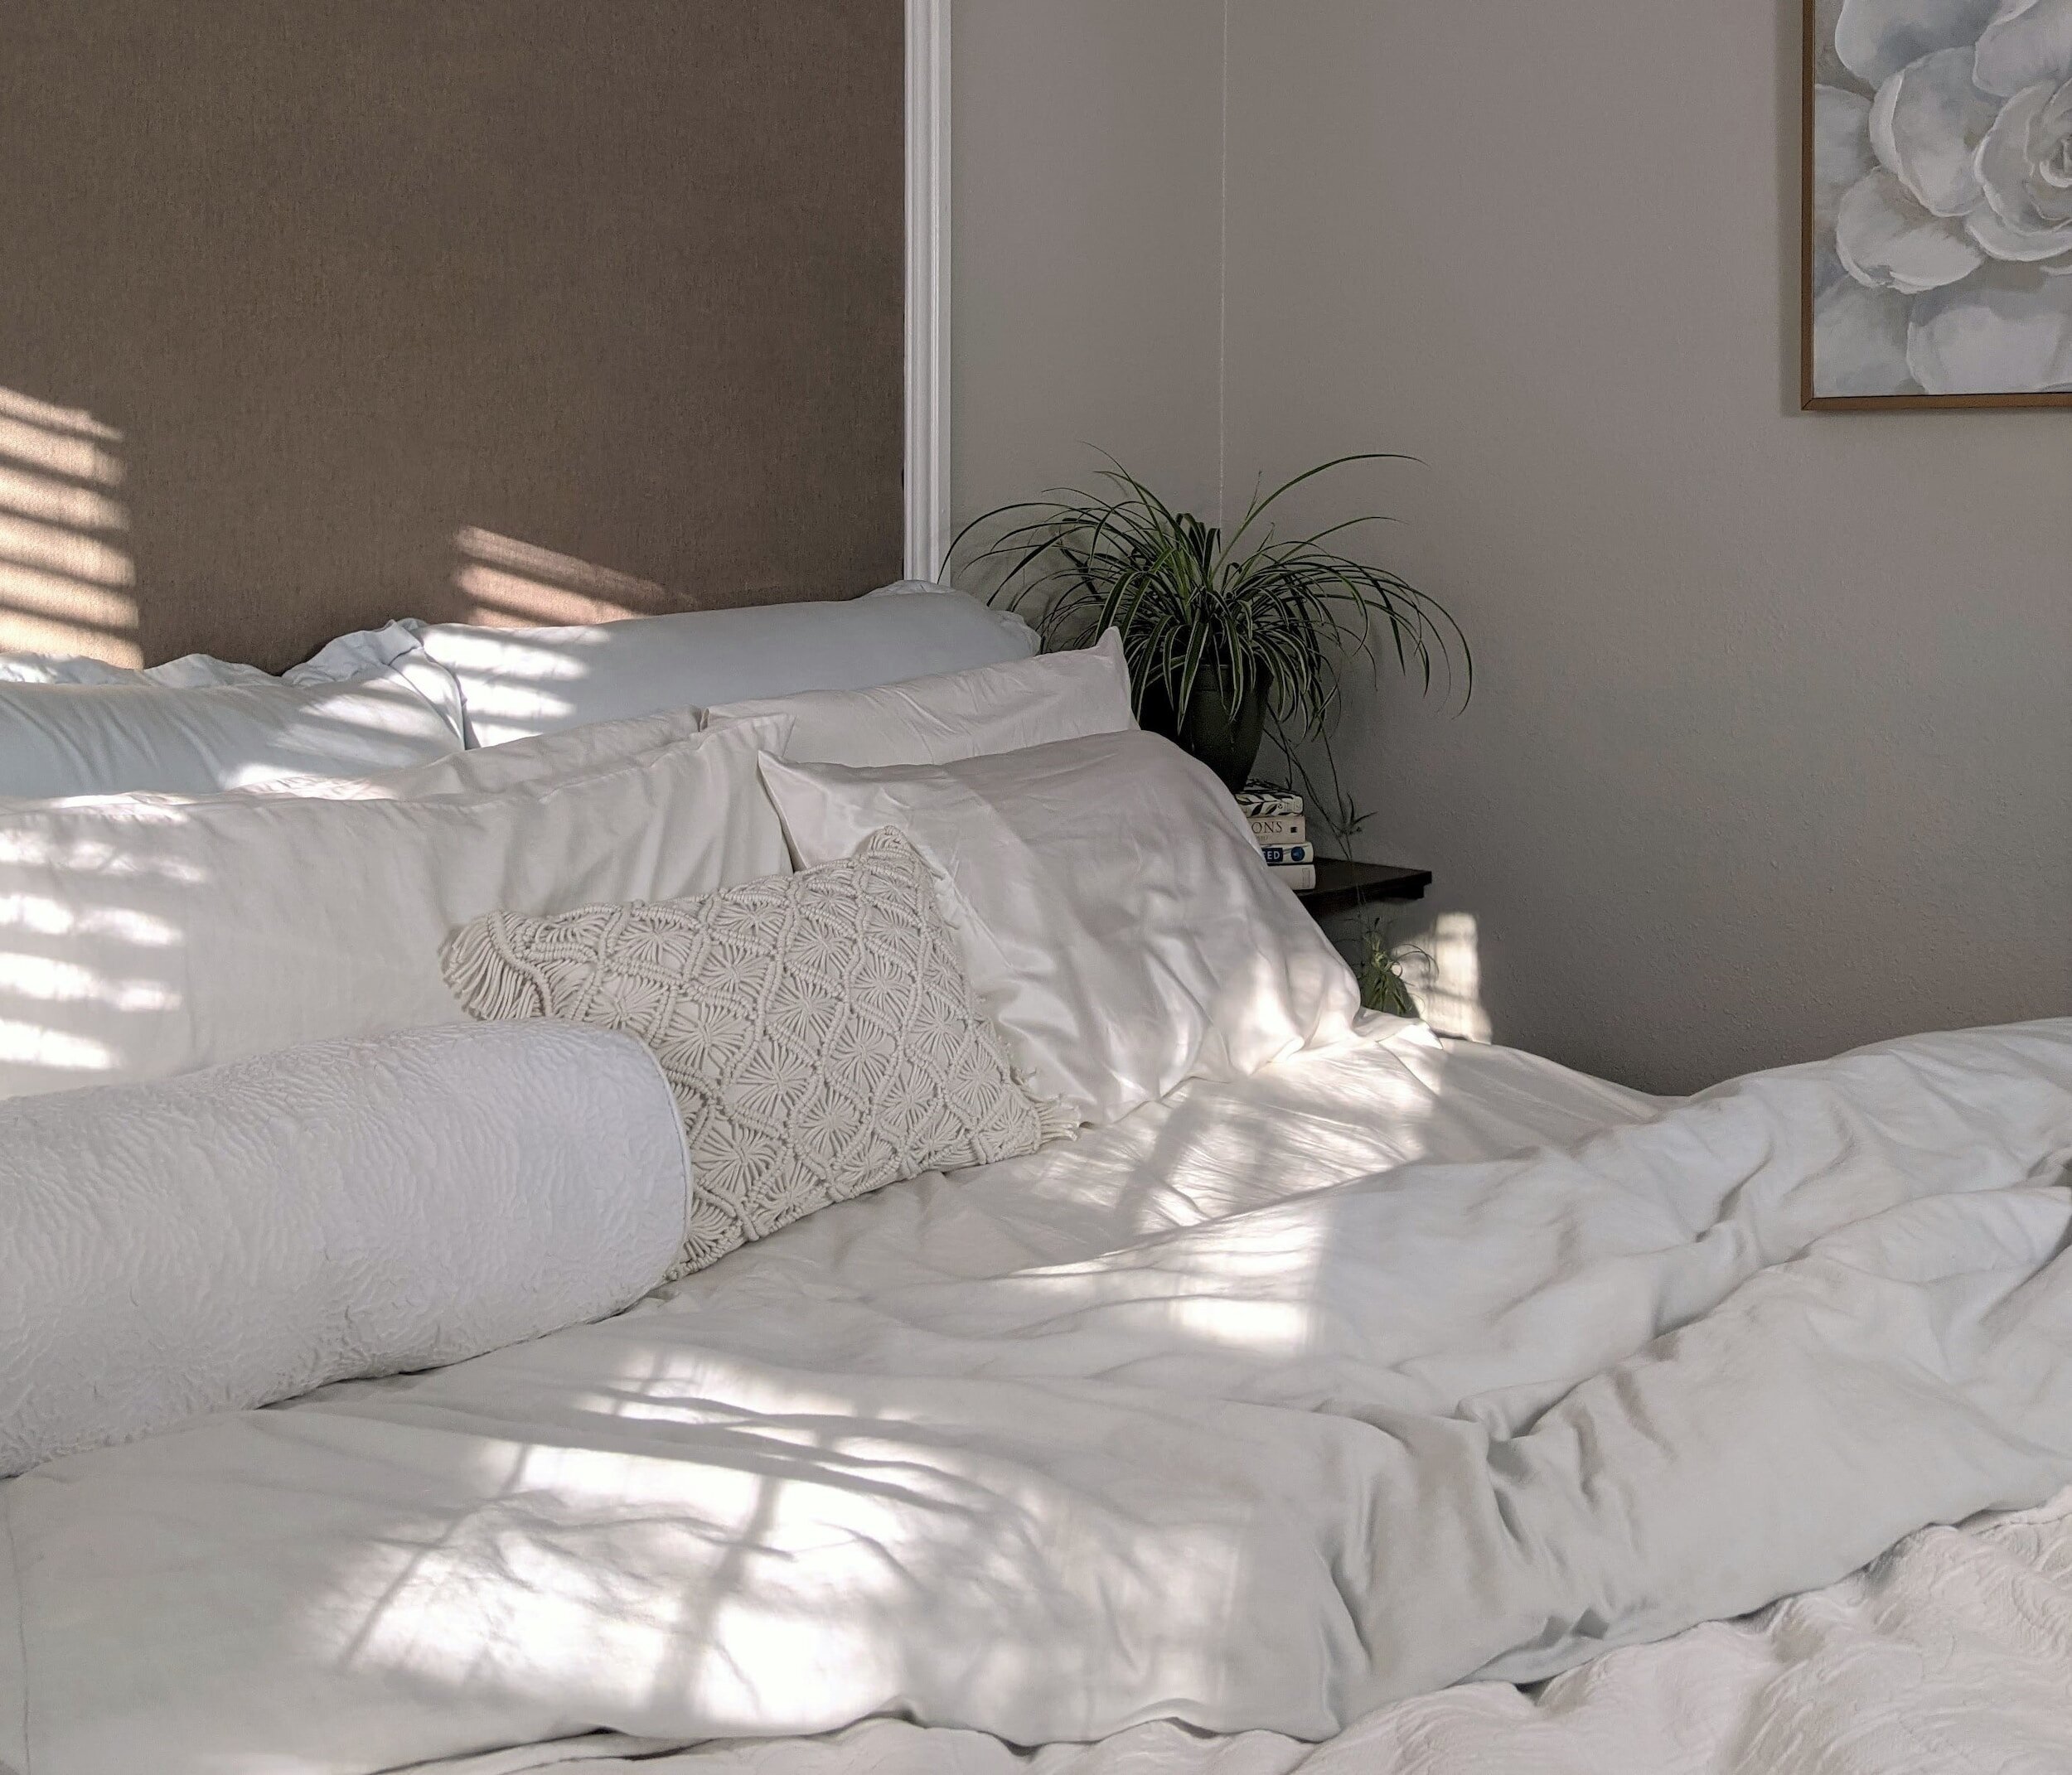 Feng shui in the bedroom: create an oasis of calm and harmony